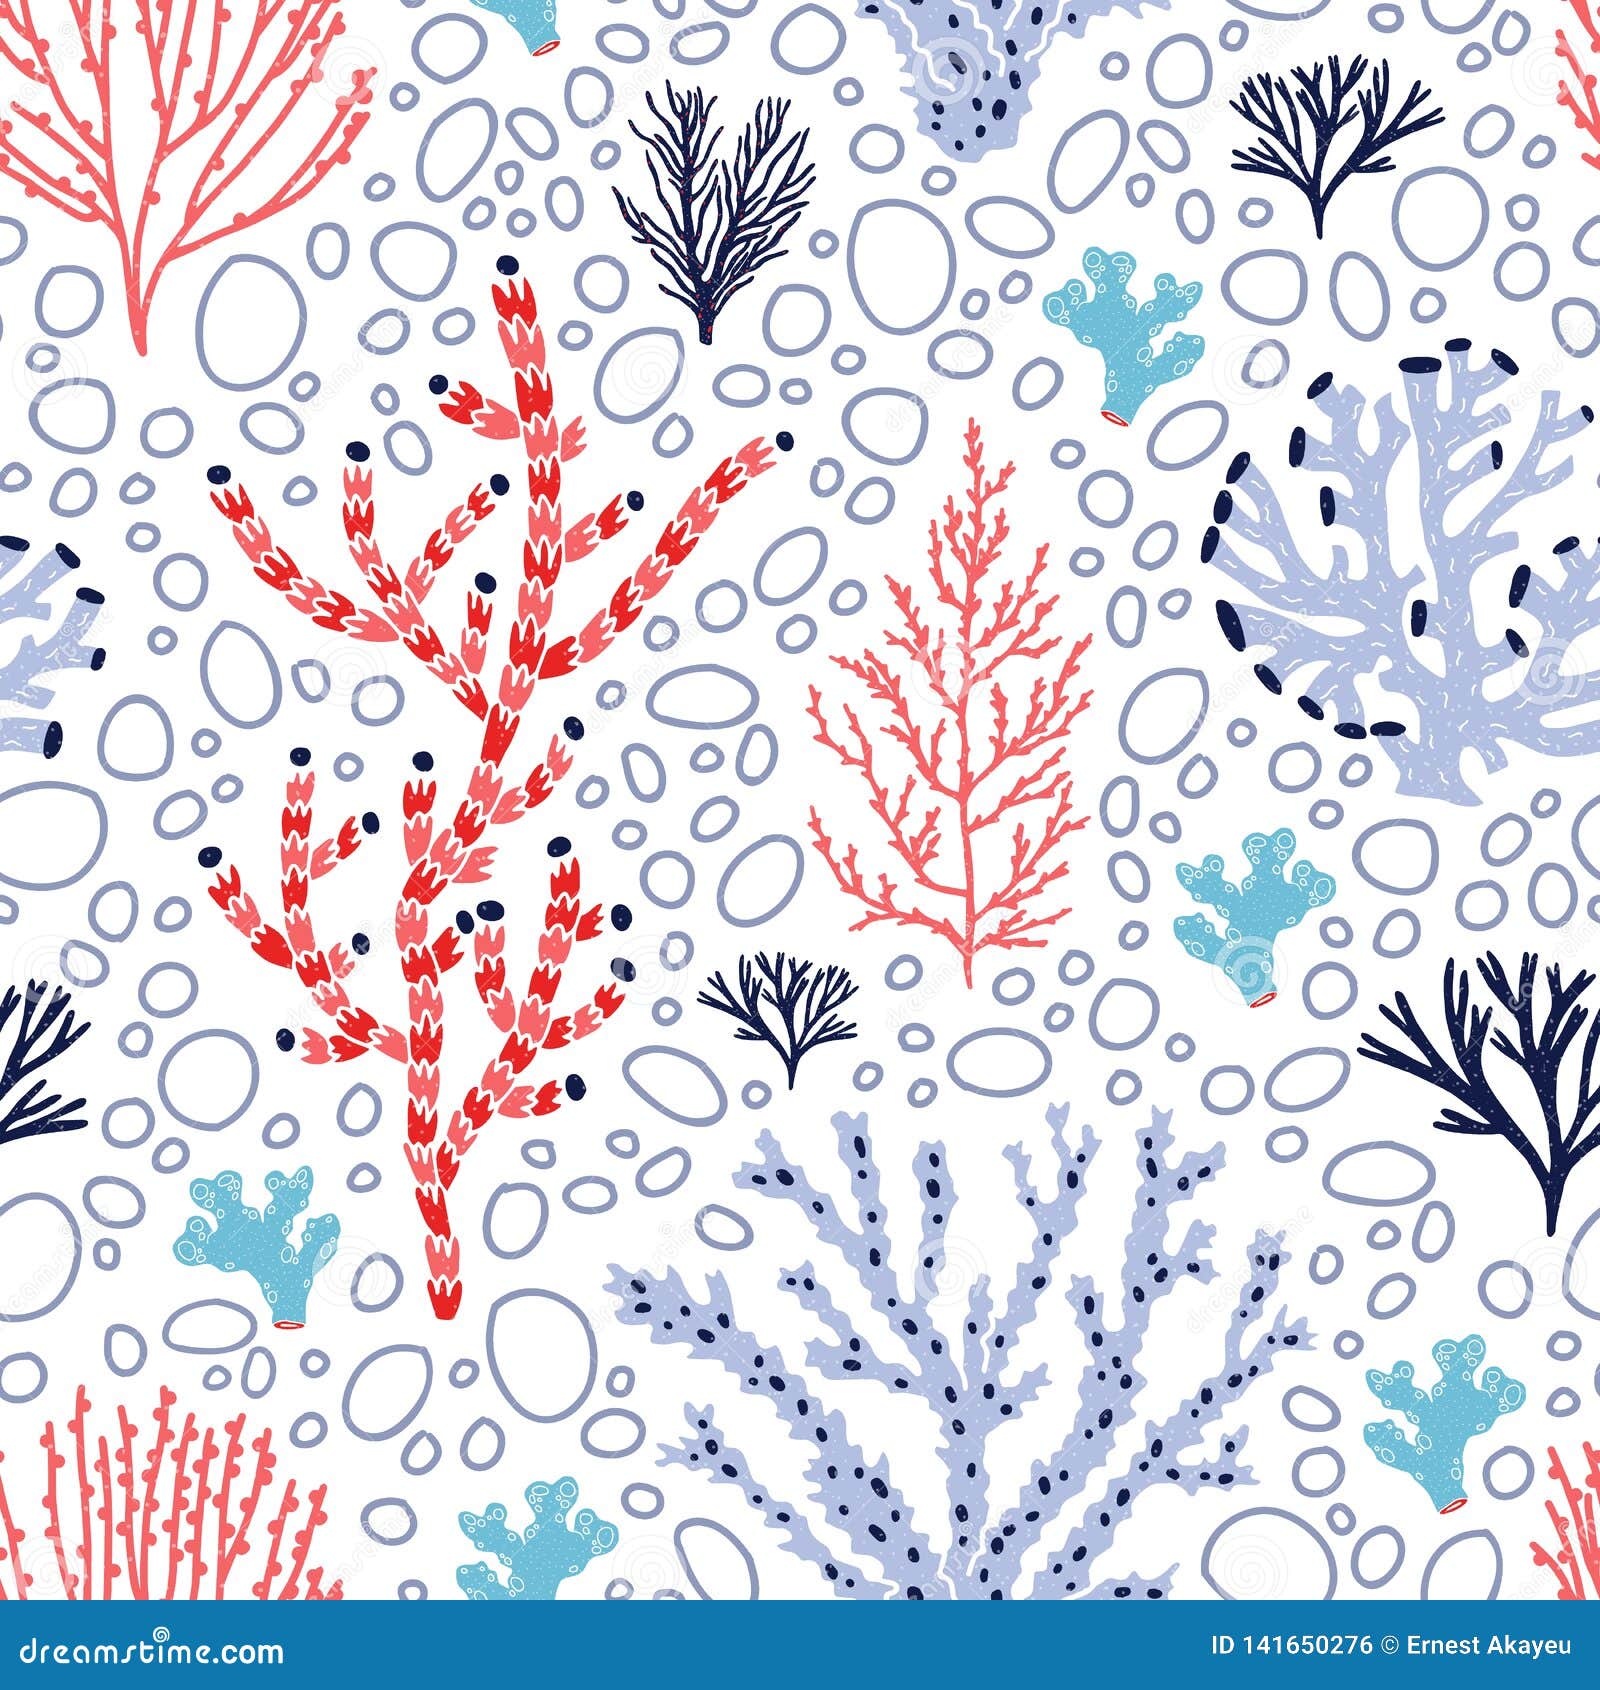 seamless pattern with red and blue corals and seaweed on white background. backdrop with tropical aquatic species, sea